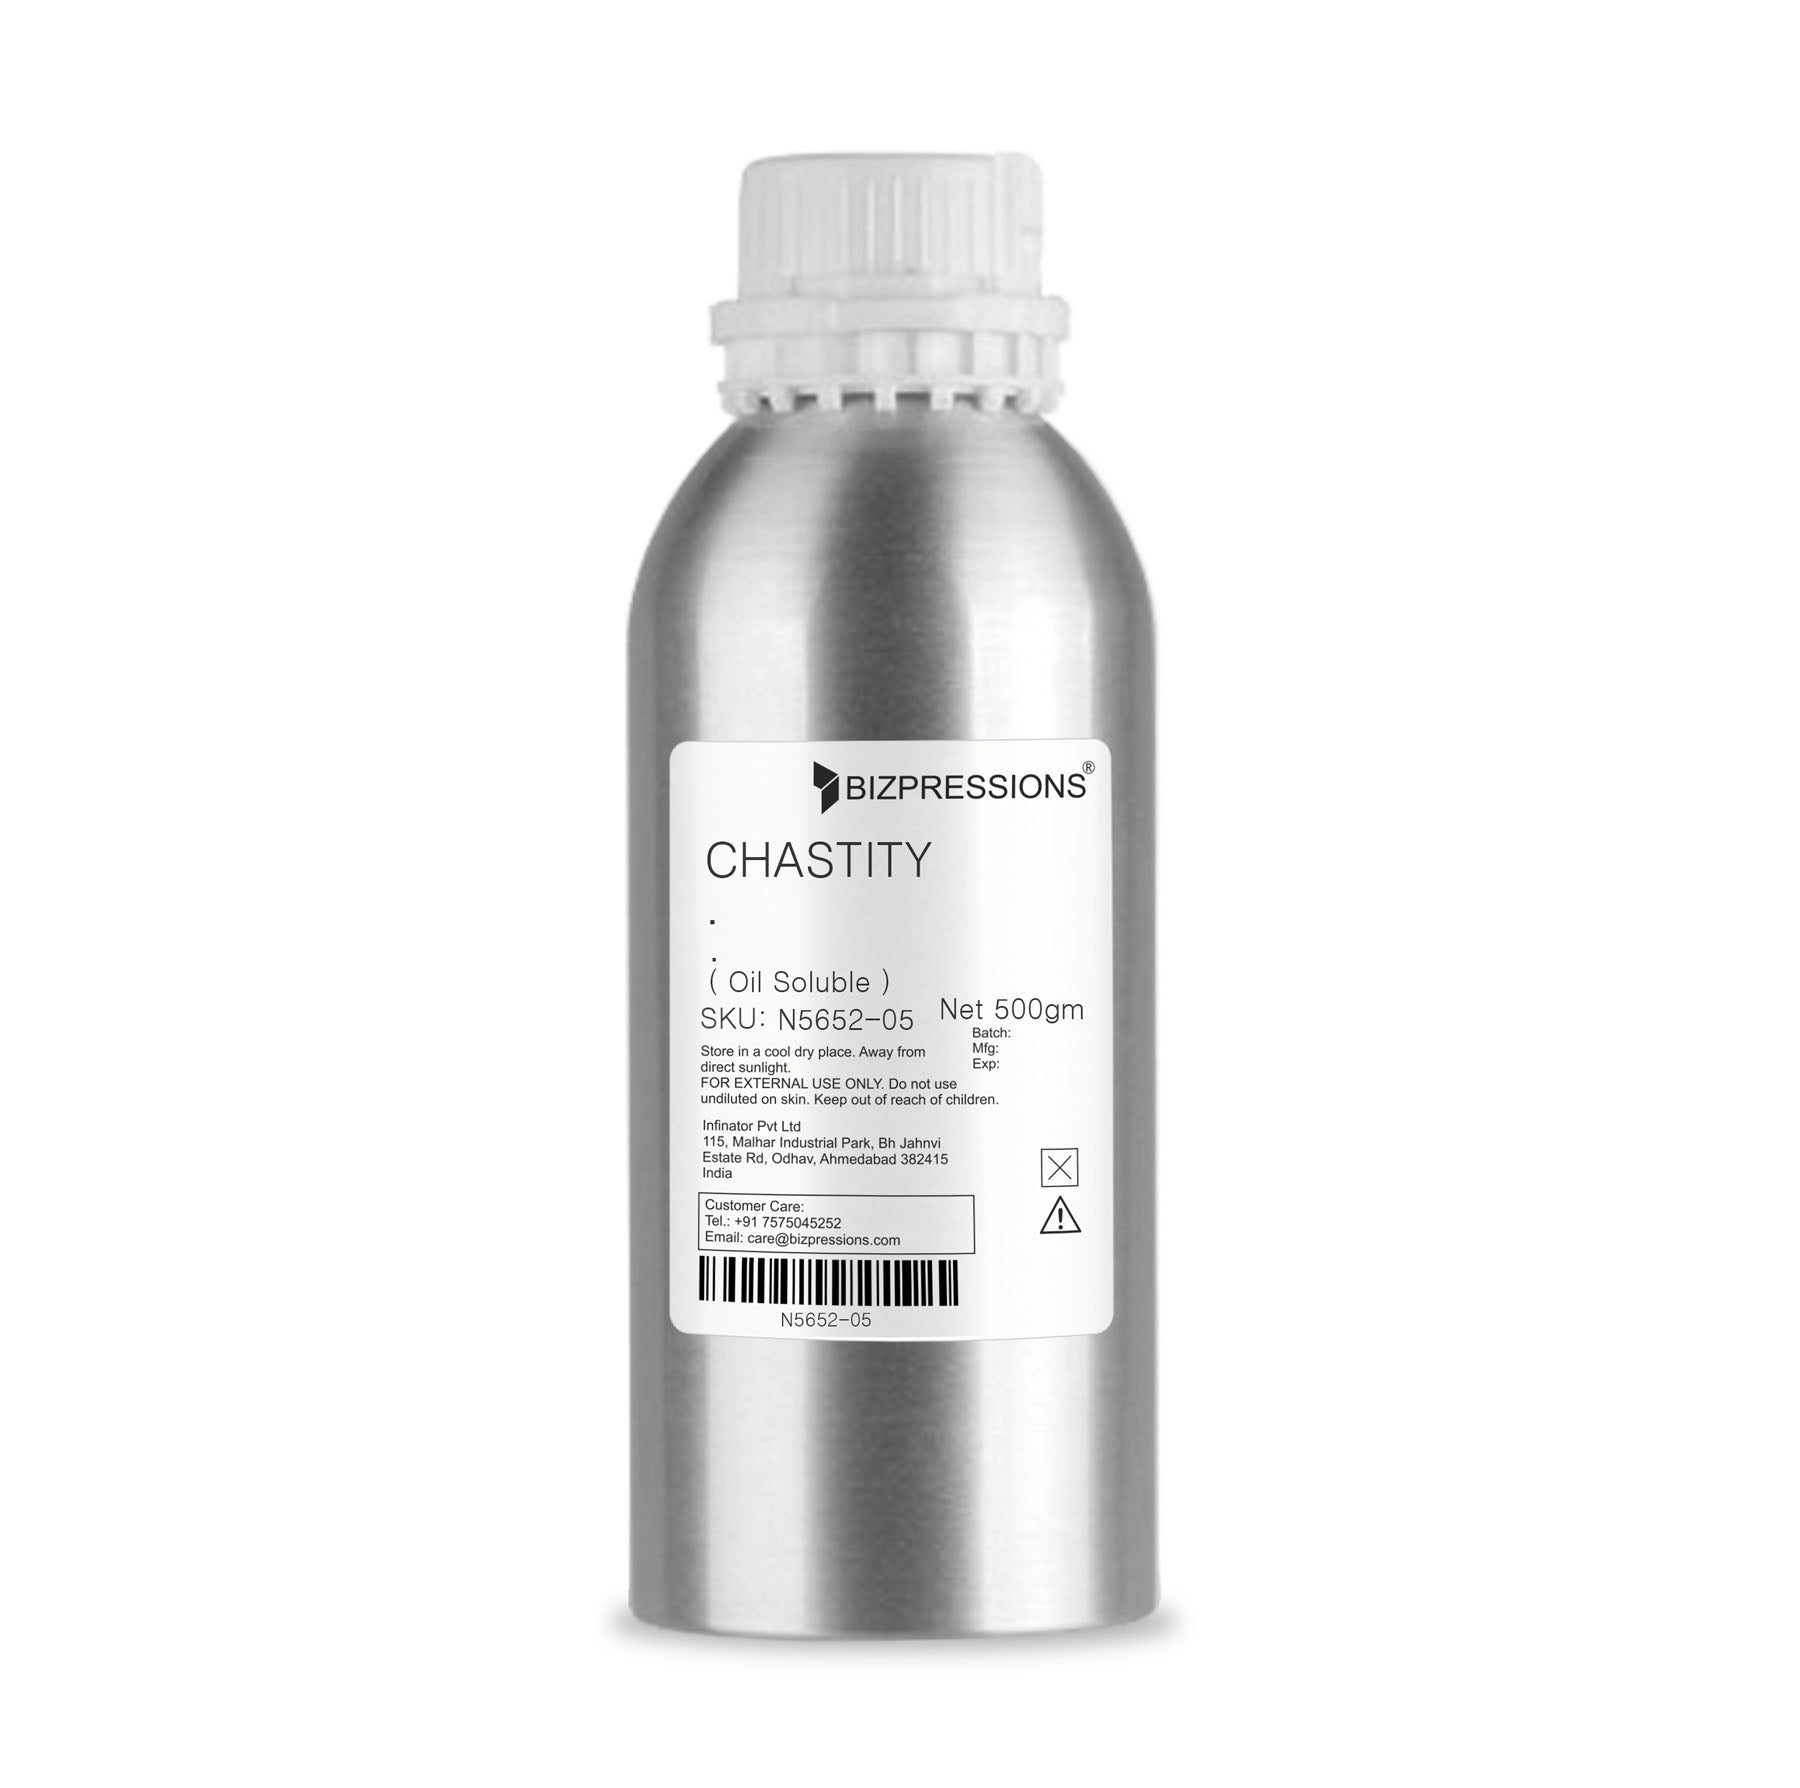 CHASTITY - Fragrance ( Oil Soluble ) - 500 gm